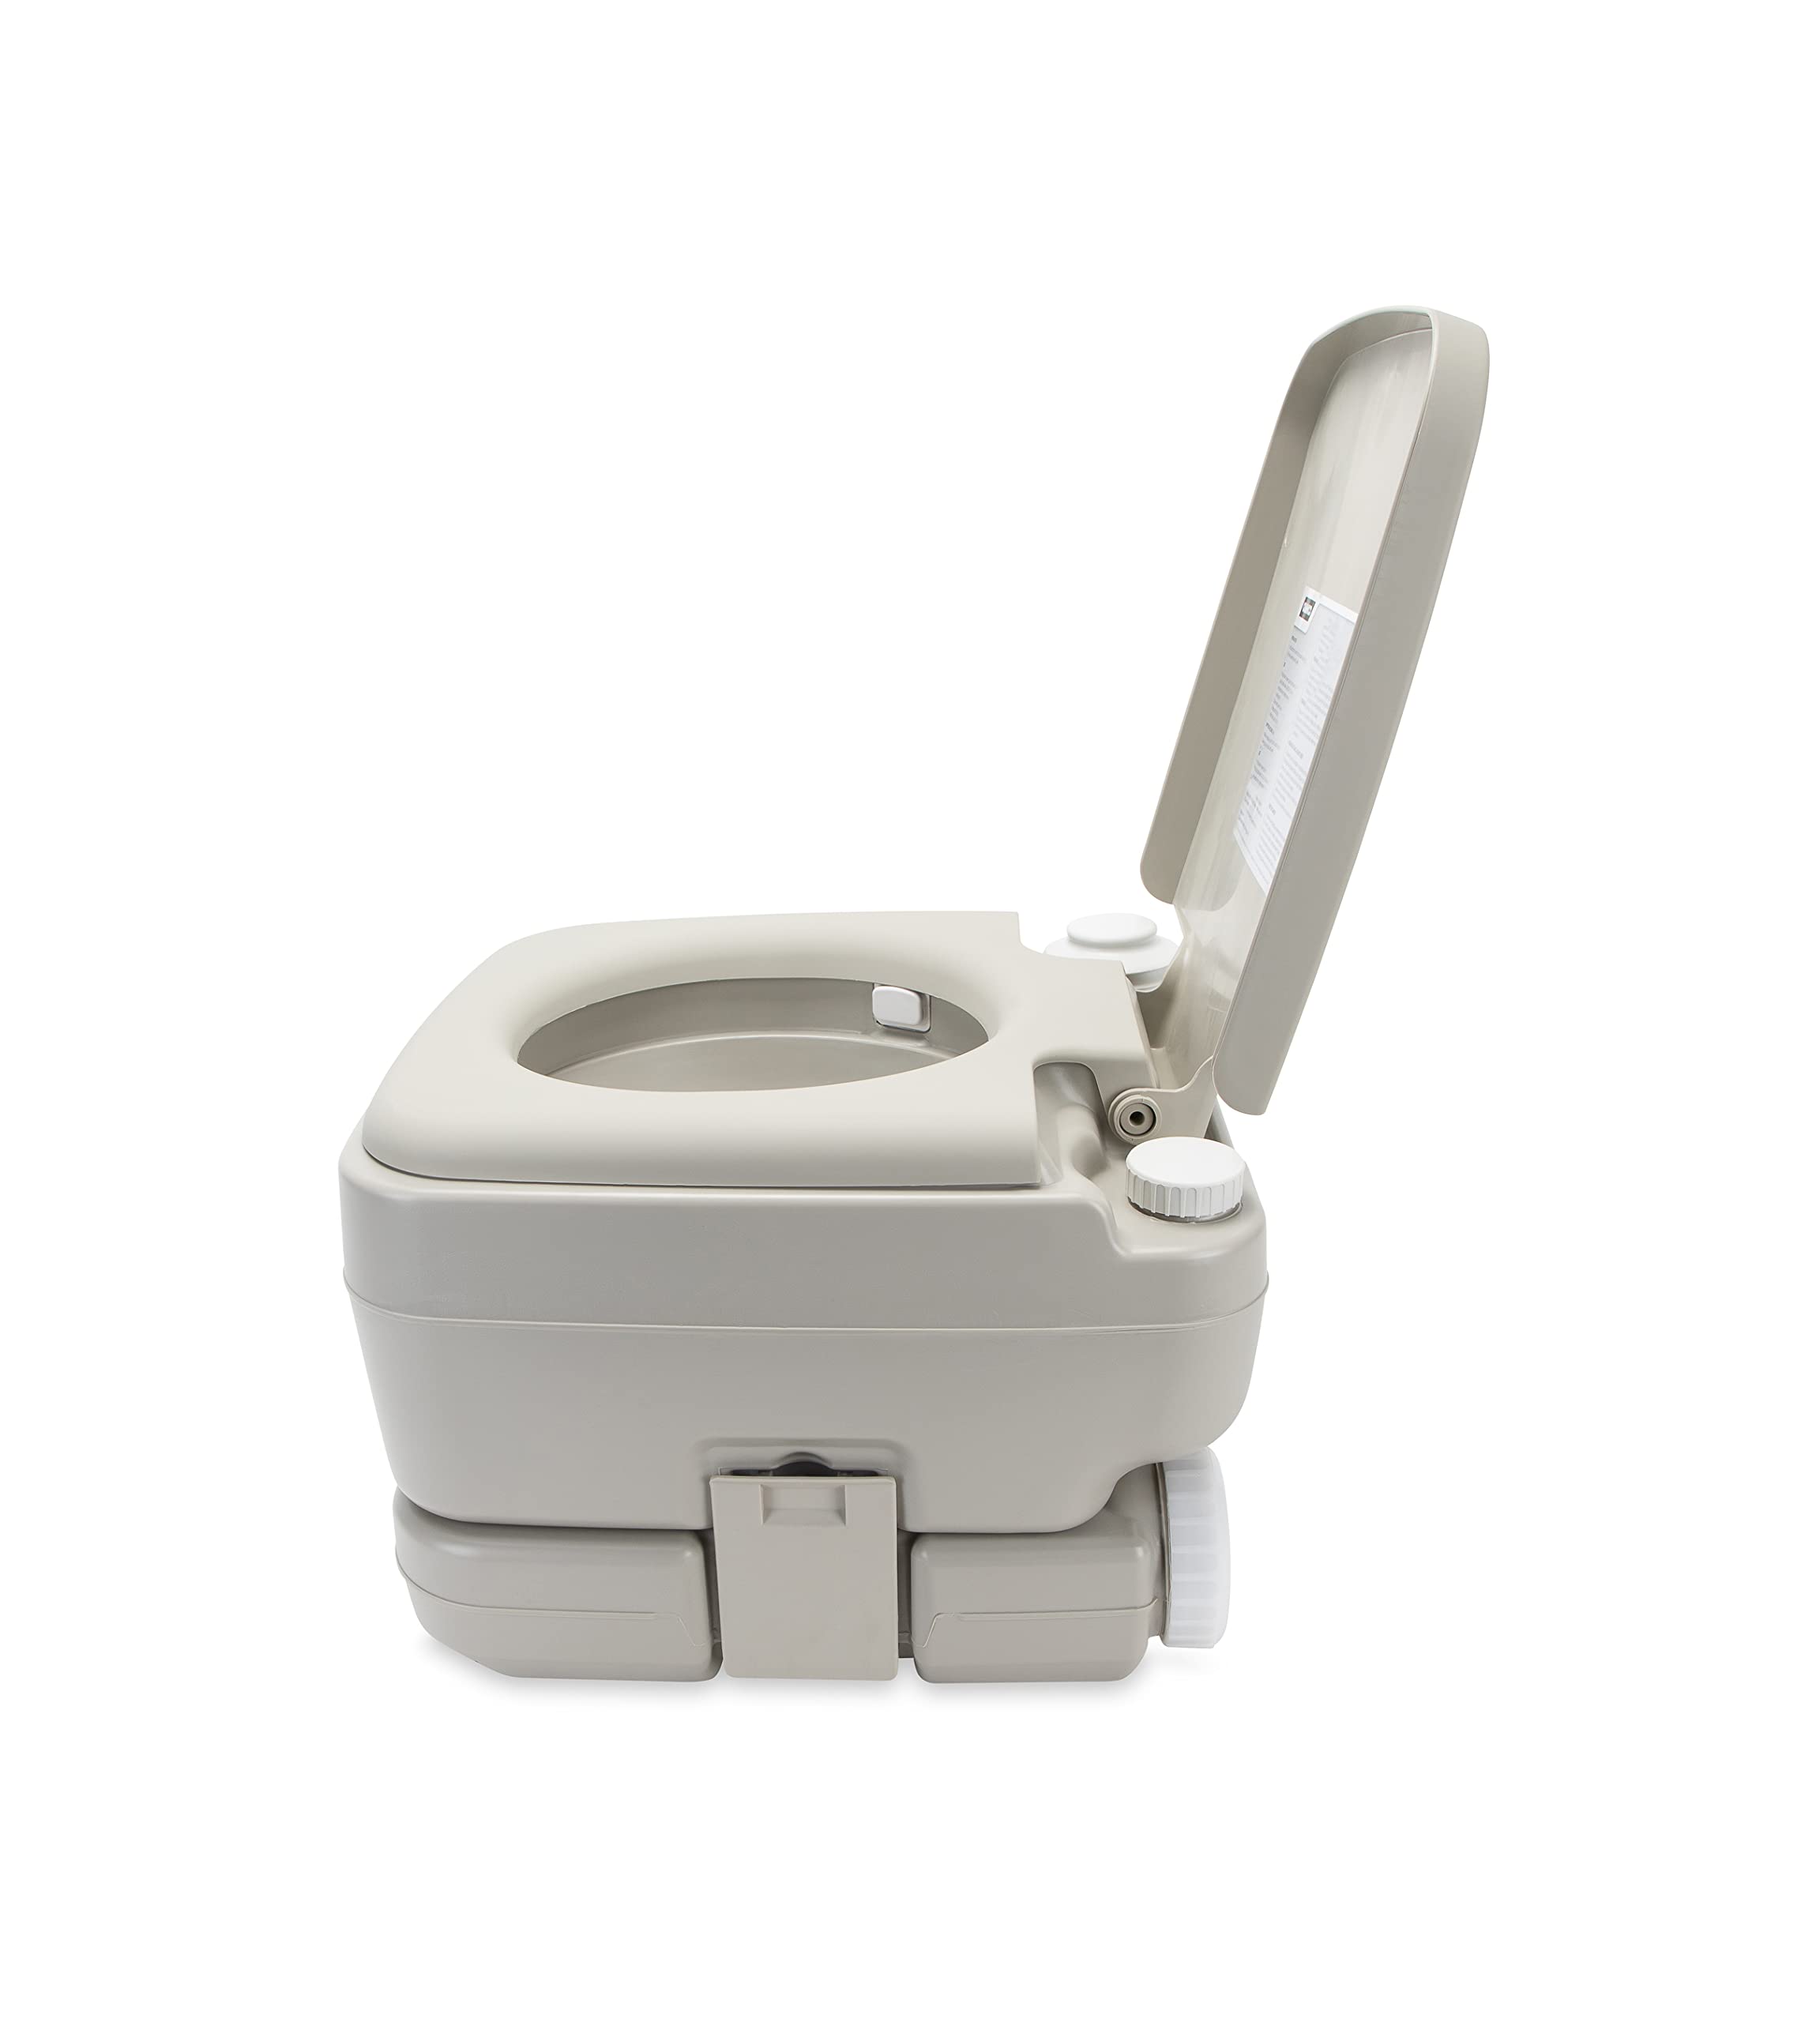 Camco Portable Travel Toilet | Features Bellow-Type Flush and Sealing Slide Valve to Lock-in Odors 2.6 Gallon (41531),Gray/Beige